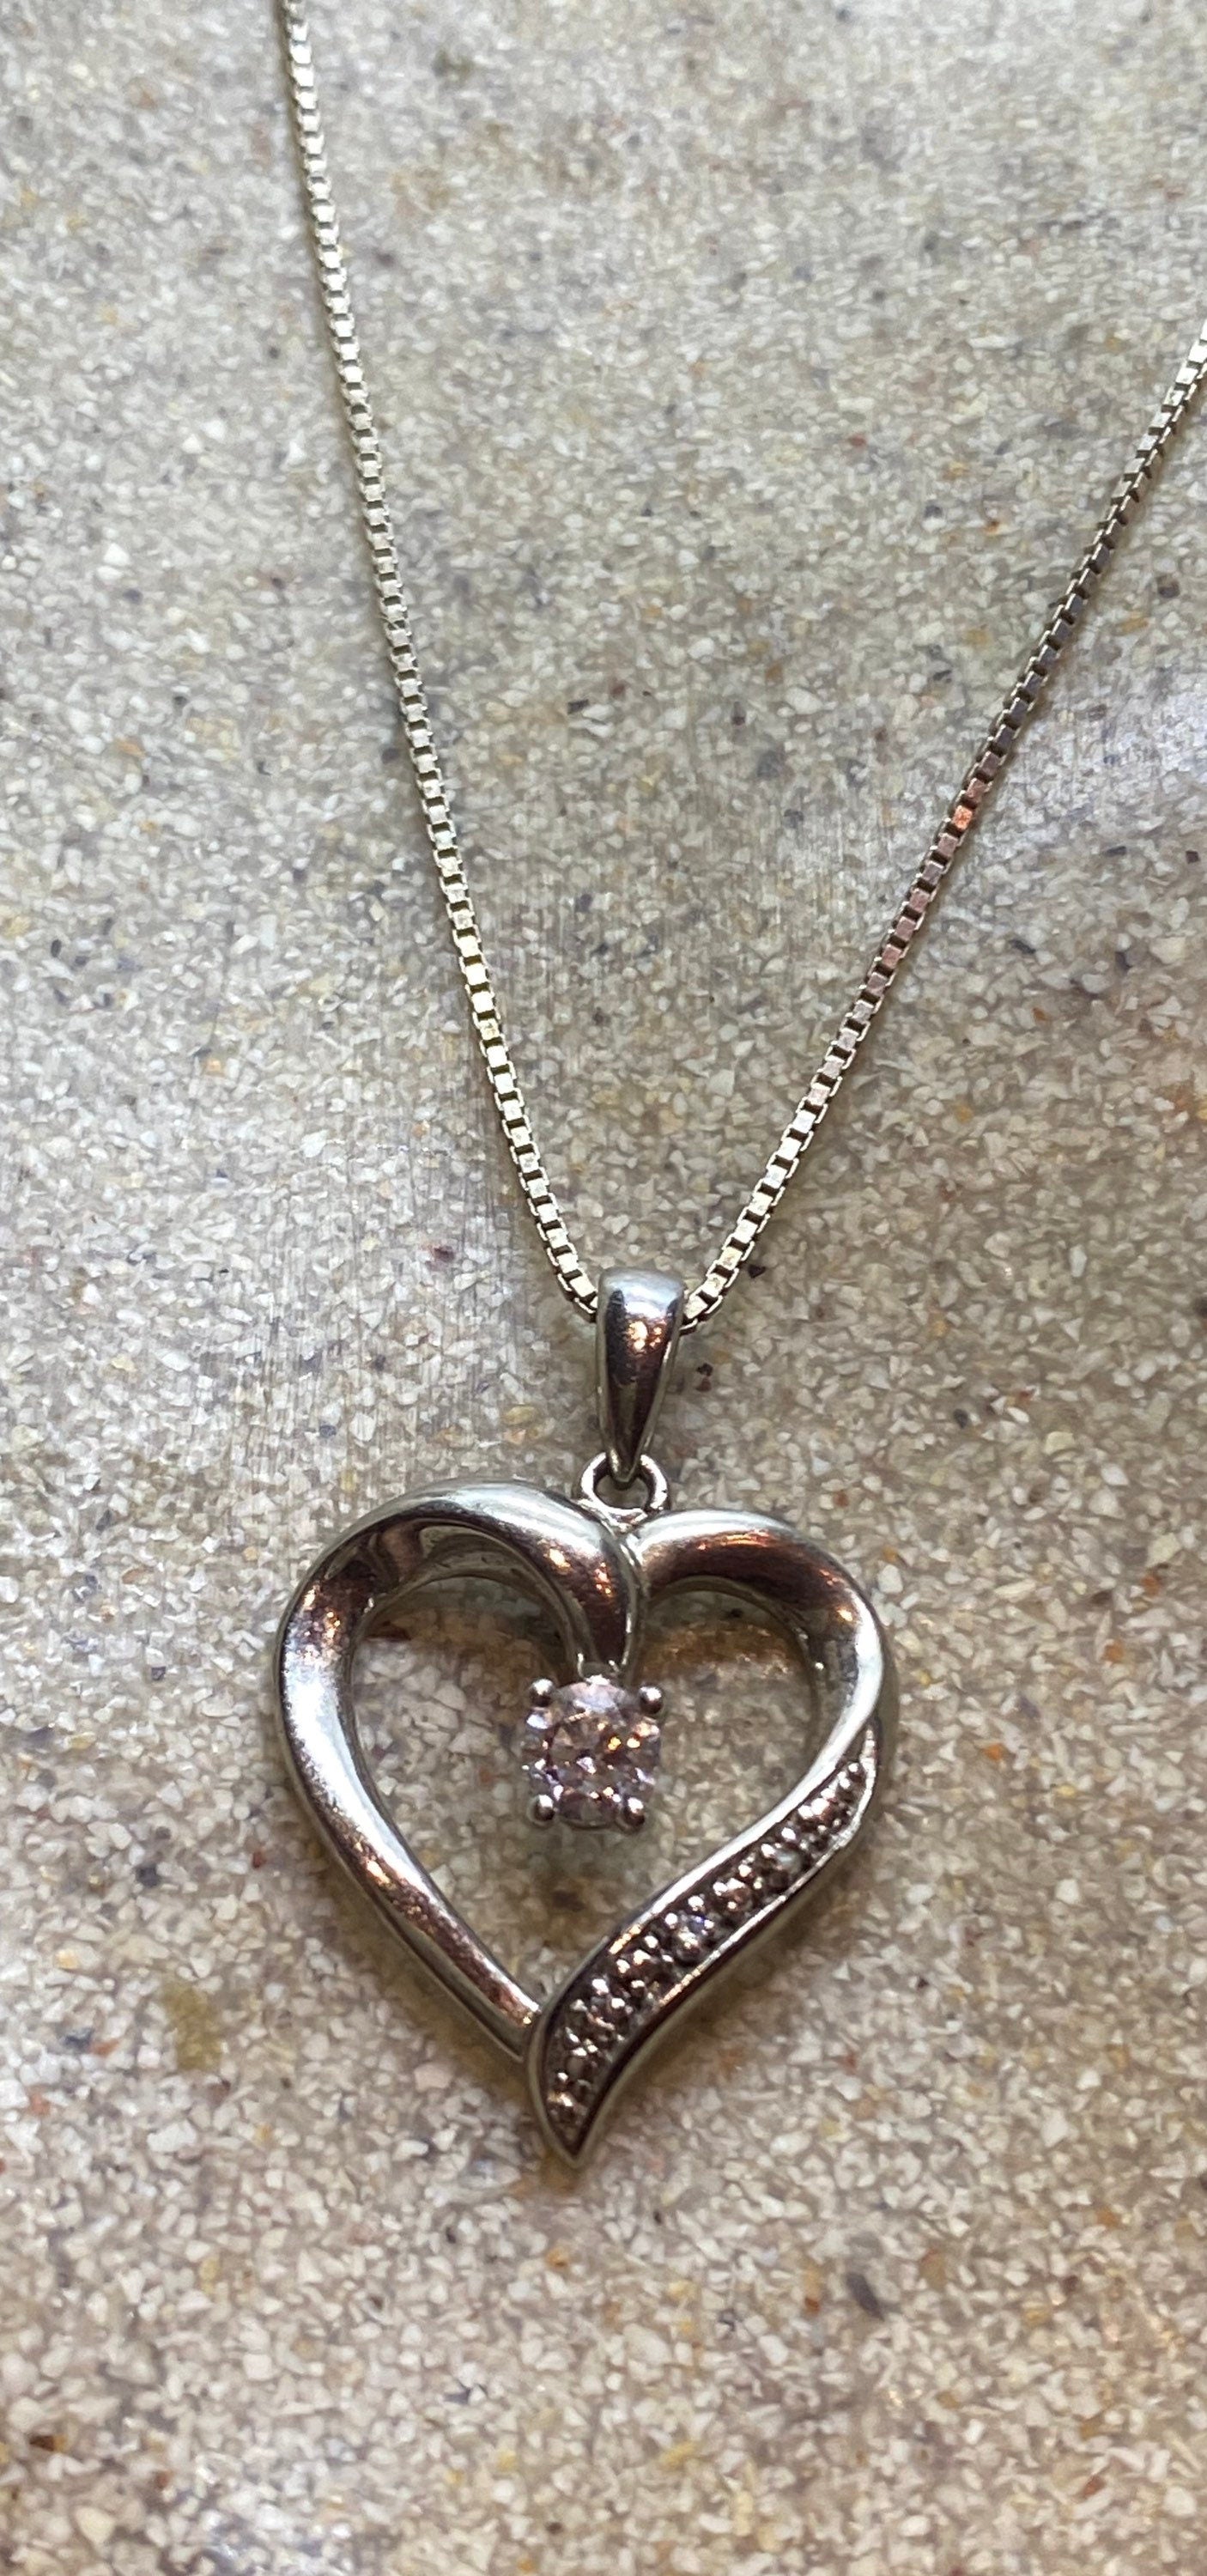 Vintage 925 Sterling Silver White Sapphire Heart Pendant 18 inch necklace